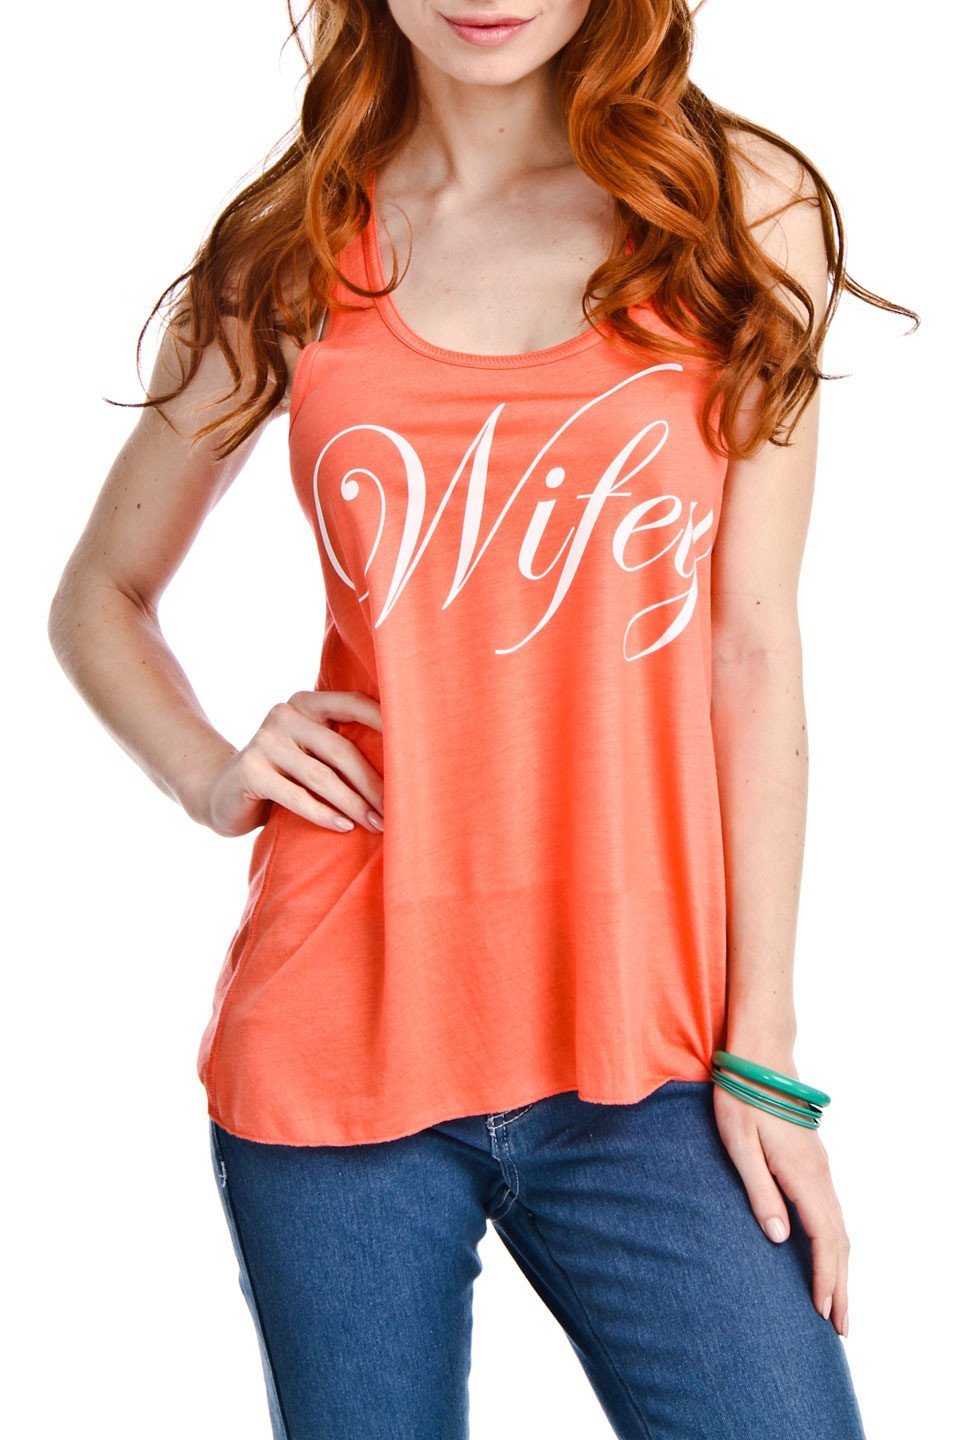 Wifey Tank Top flowy cotton/polyester tank in coral